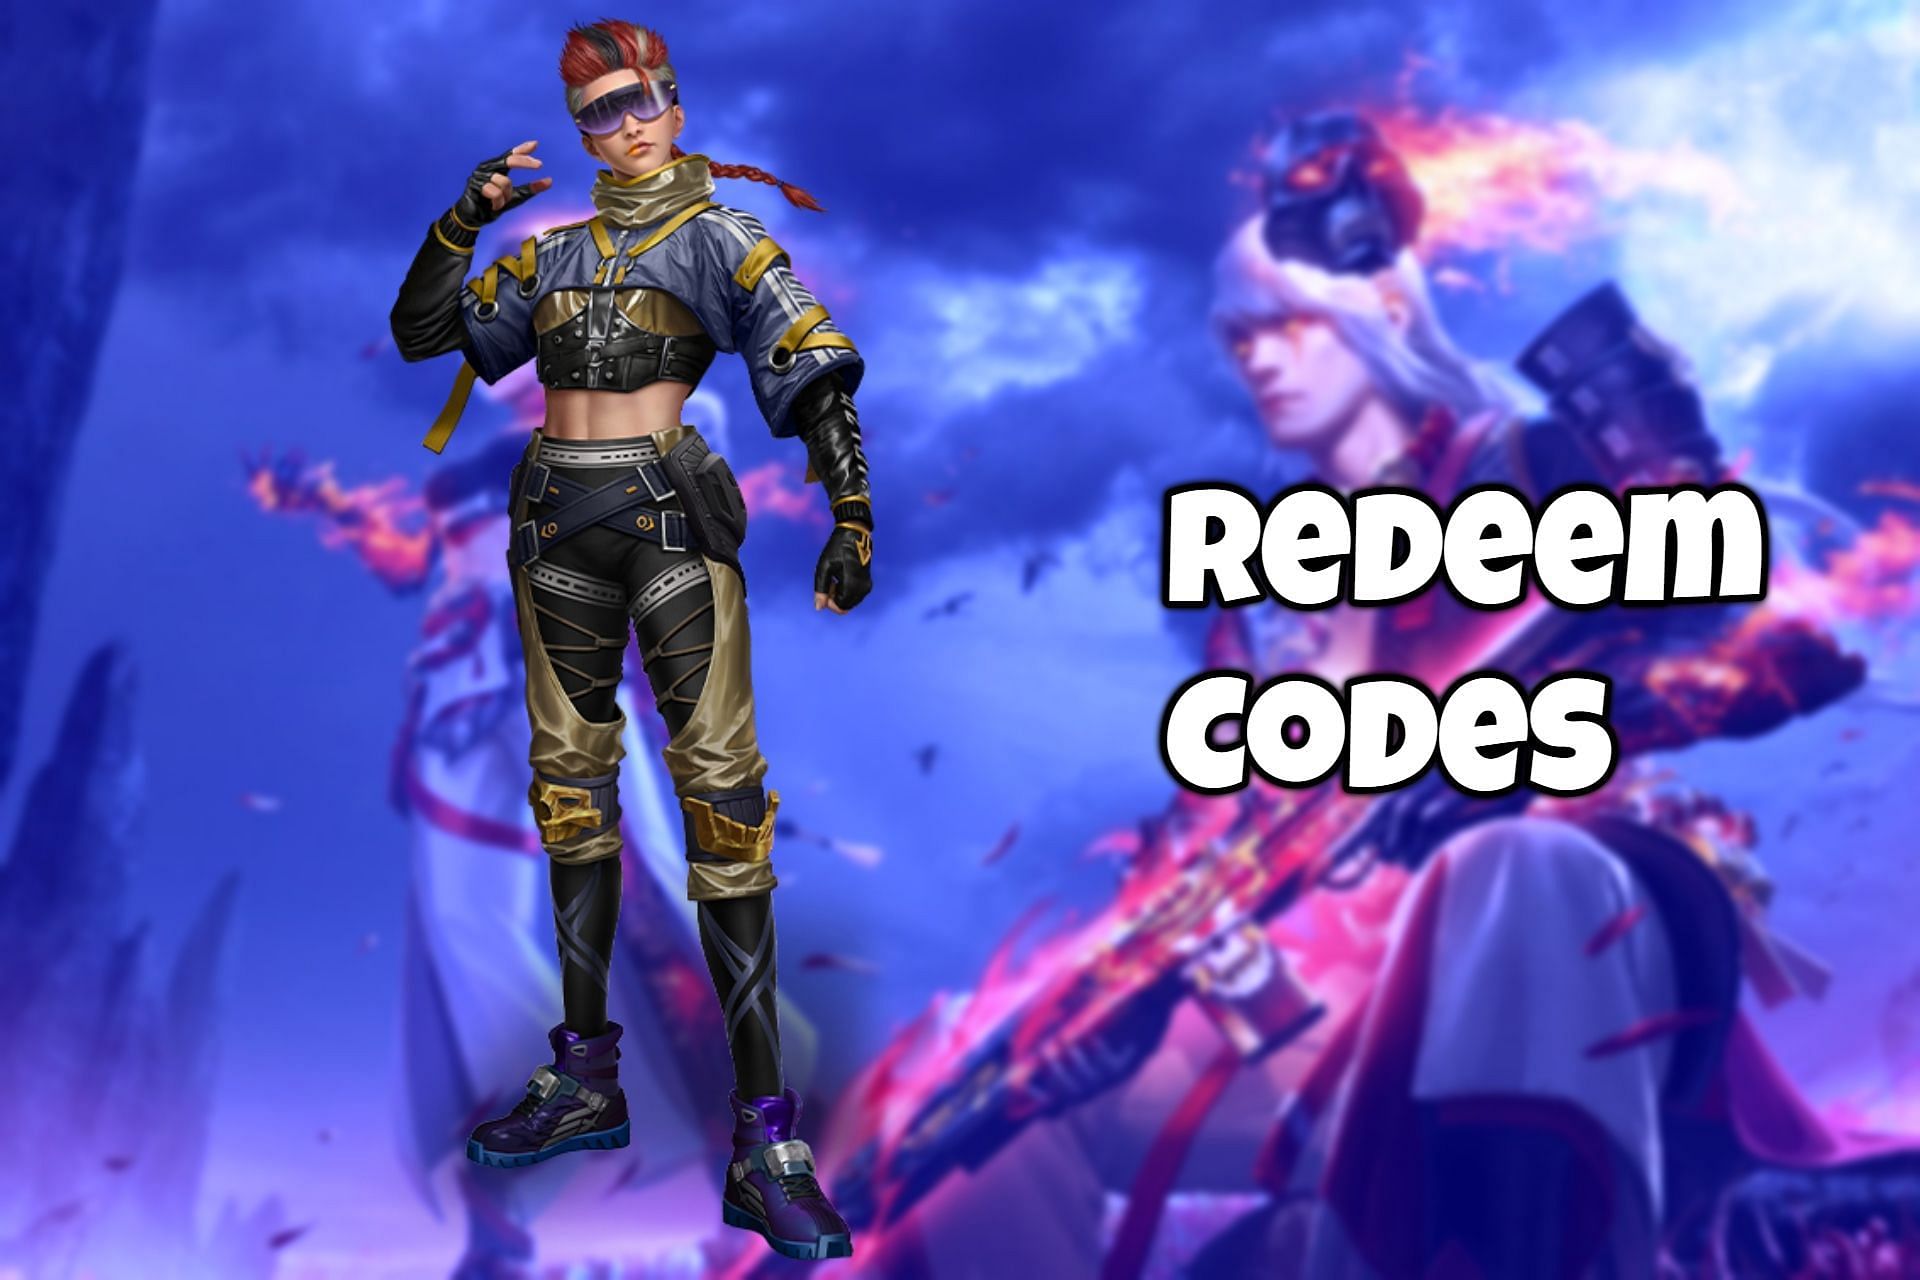 Players can make use of the redeem codes and earn free rewards (Image via Sportskeeda)